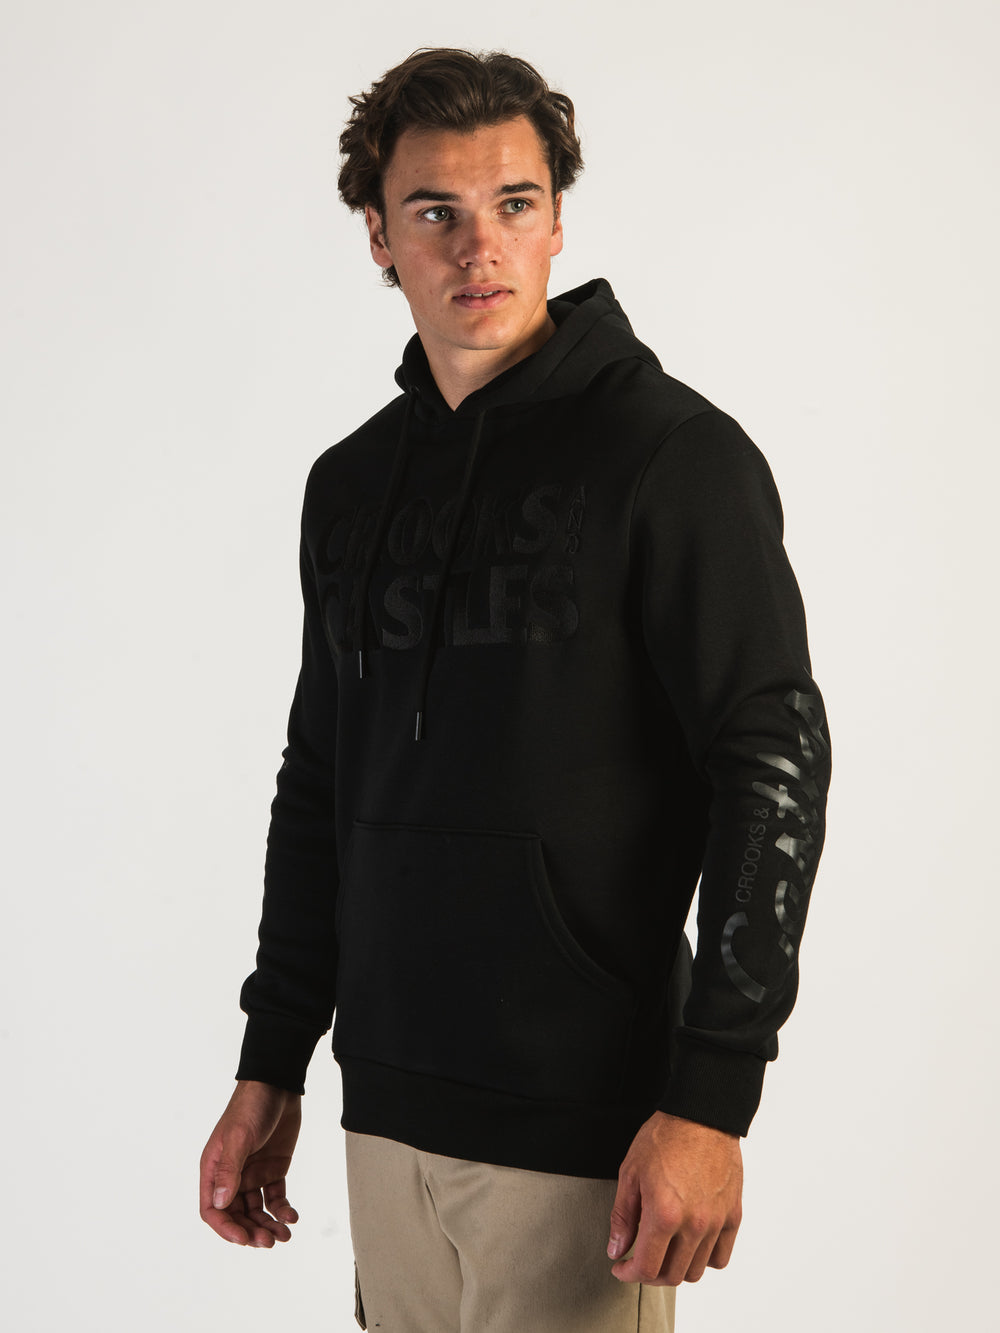 CROOKS & CASTLES TONAL EMBROIDERED PULLOVER HOODIE